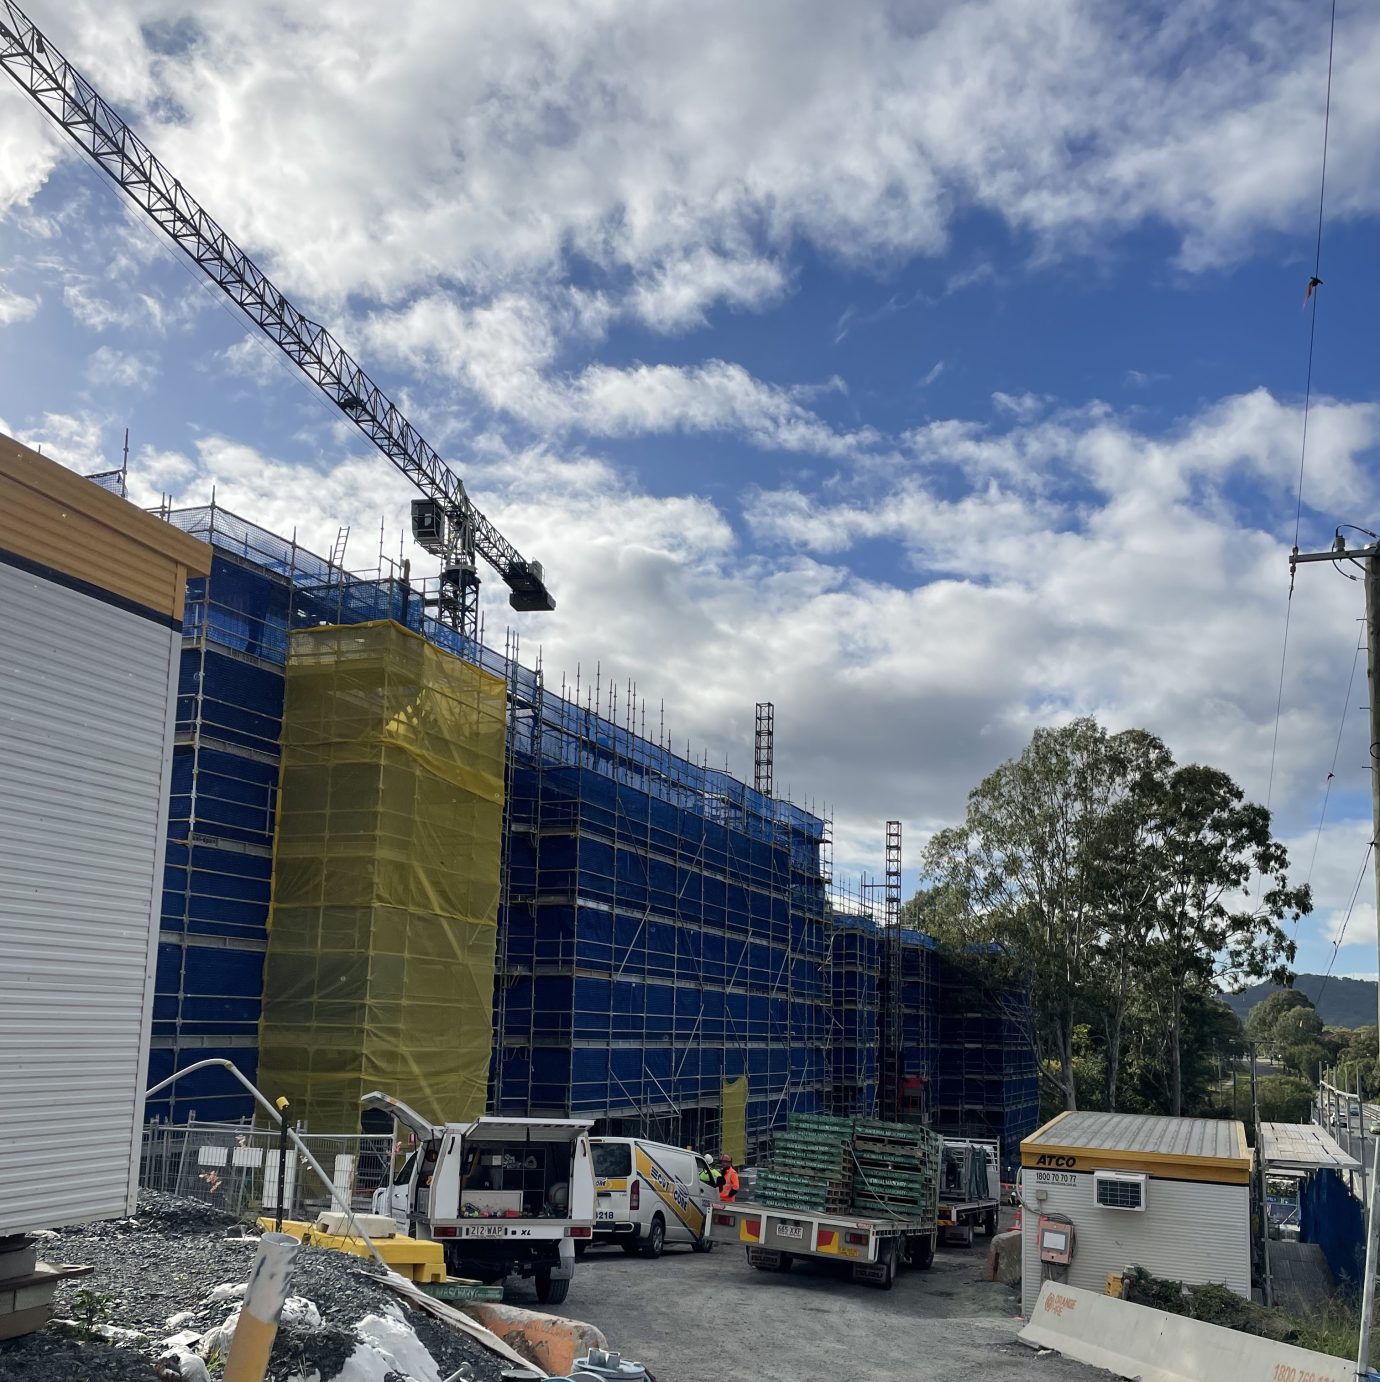 Construction site at Fairway Carindale with crane behind a blue scaffolding and ute in front of building.